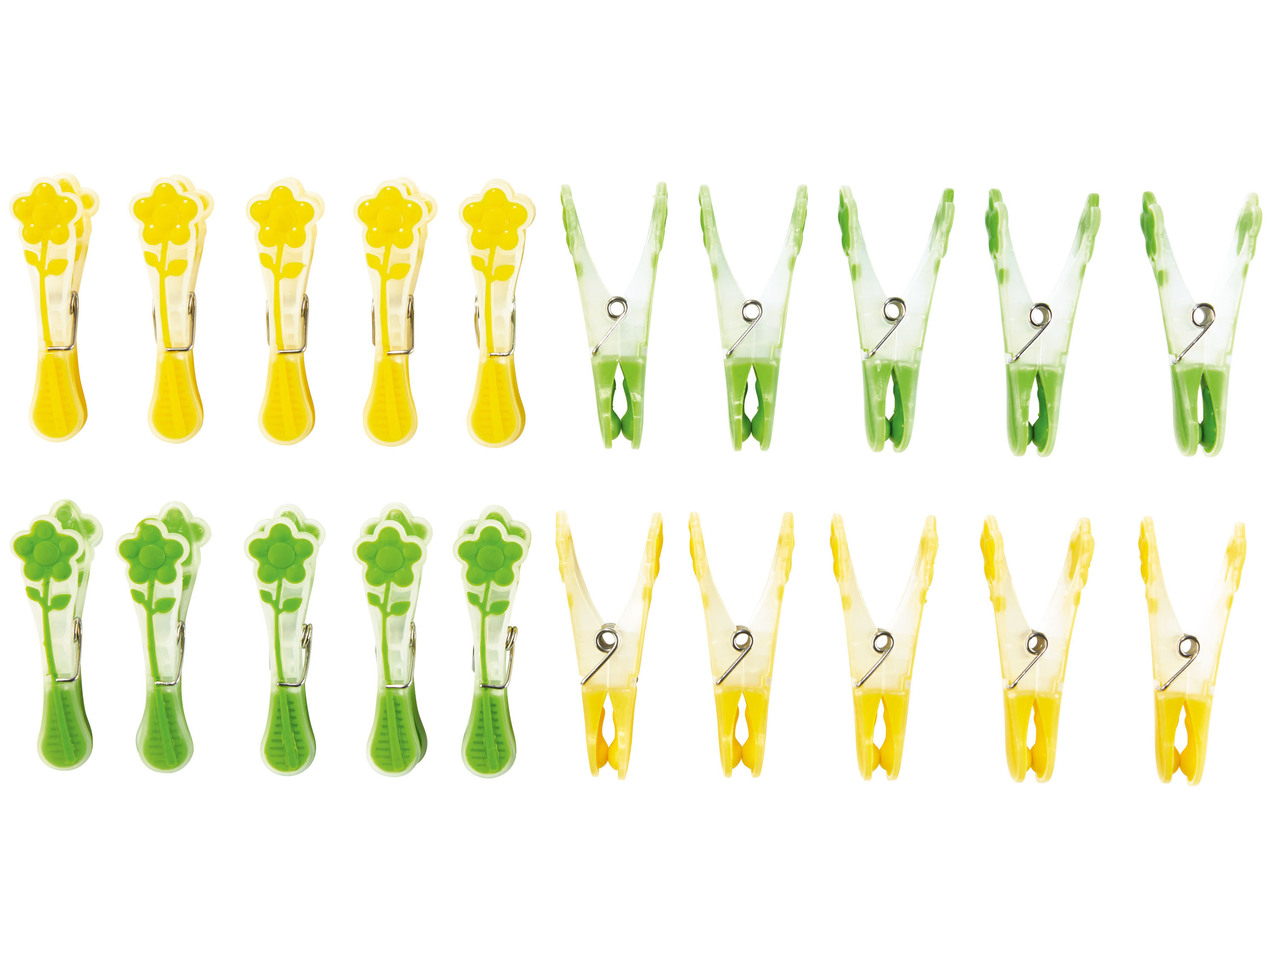 Clothes Pegs